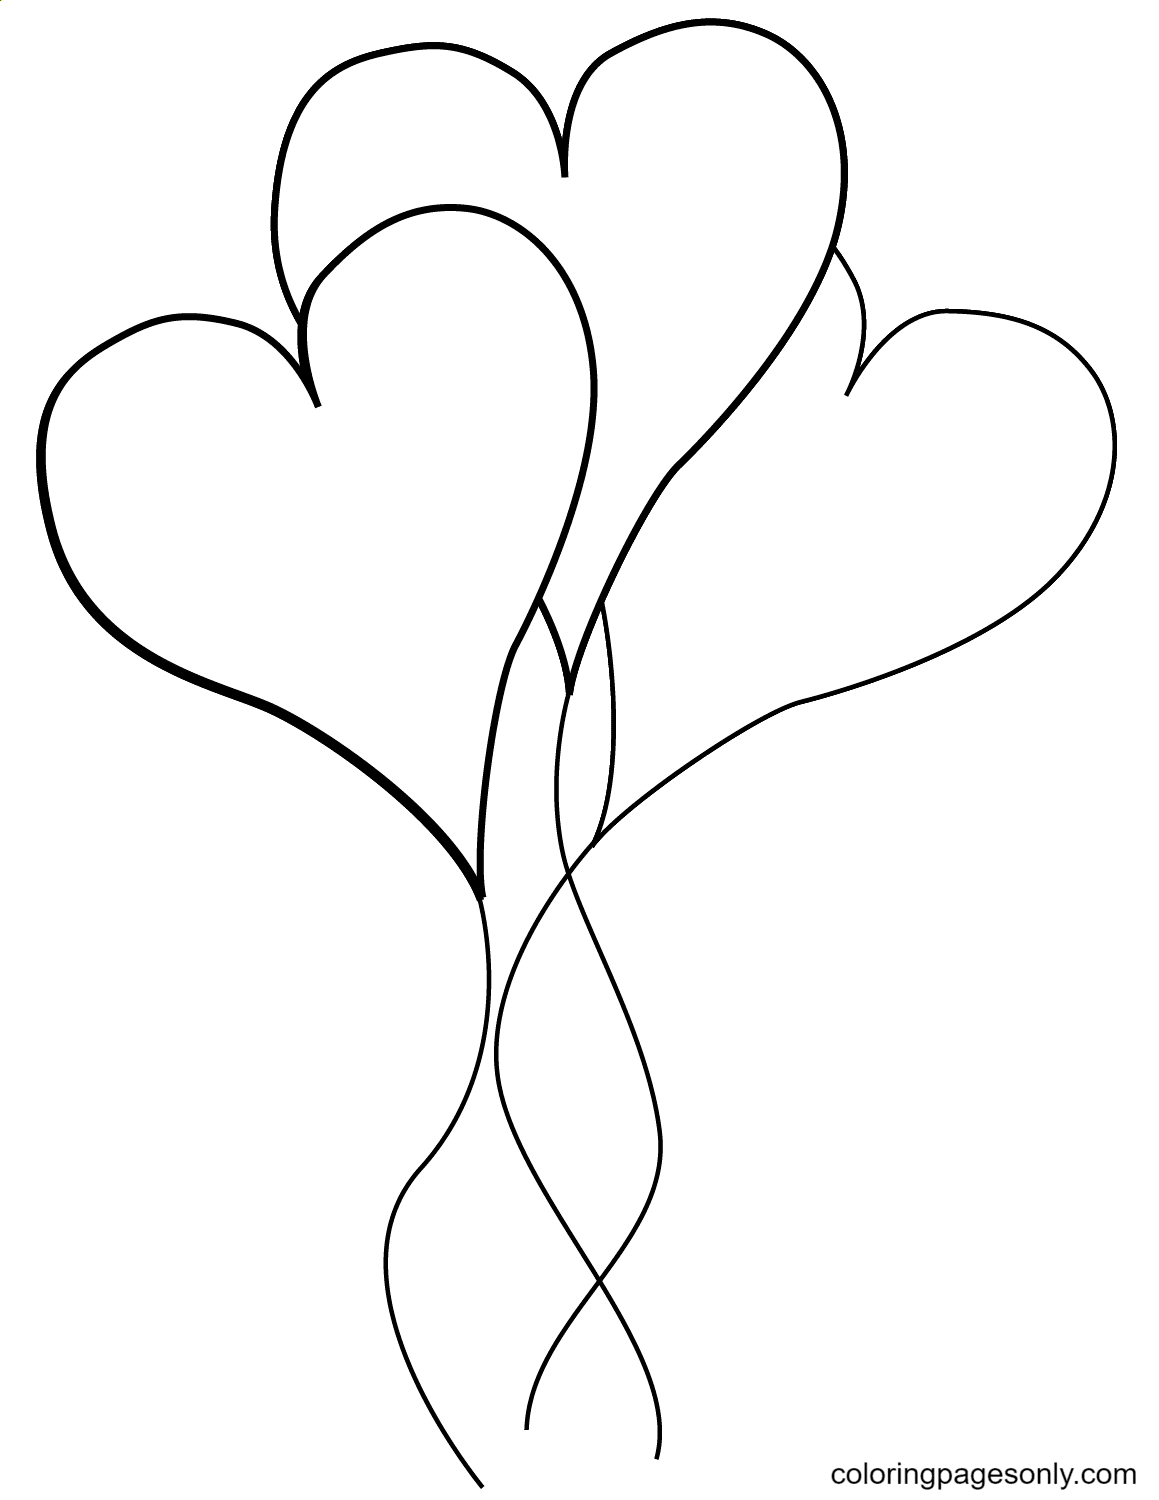 Heart-shaped Balloons Coloring Pages